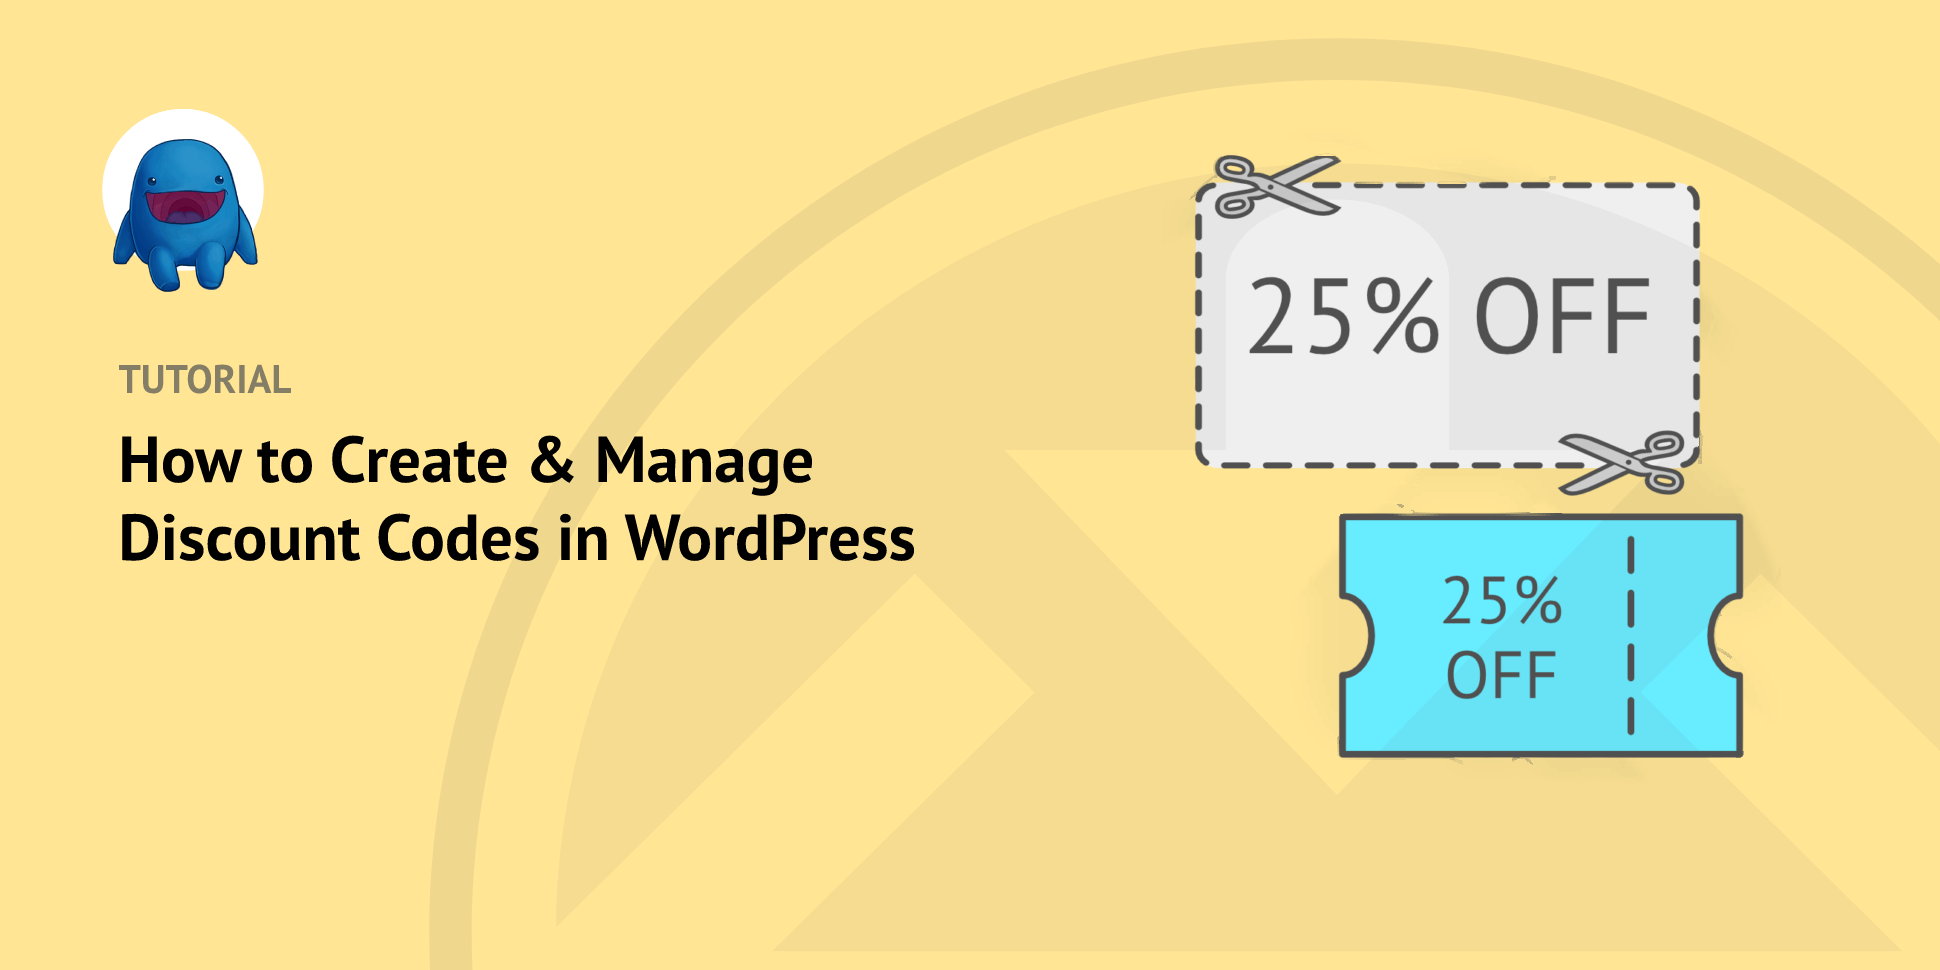 How to Create and Manage Discount Codes in WordPress